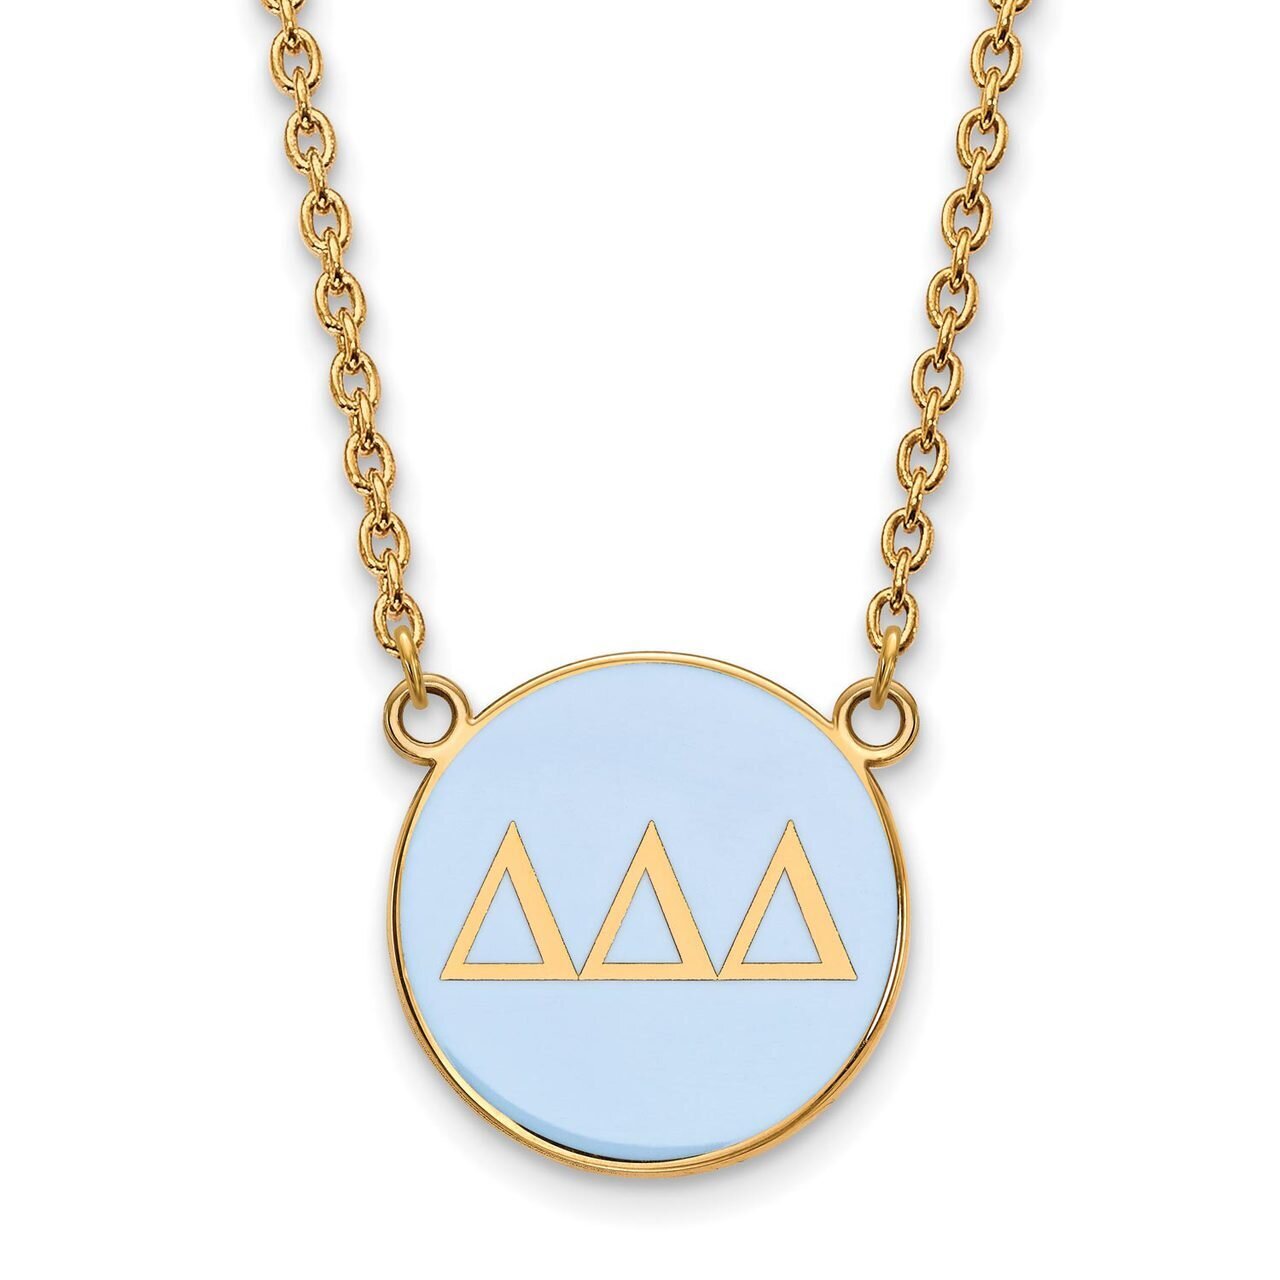 Delta Delta Delta Small Enameled Pendant with 18 Inch Chain Gold-plated Silver GP030DDD-18